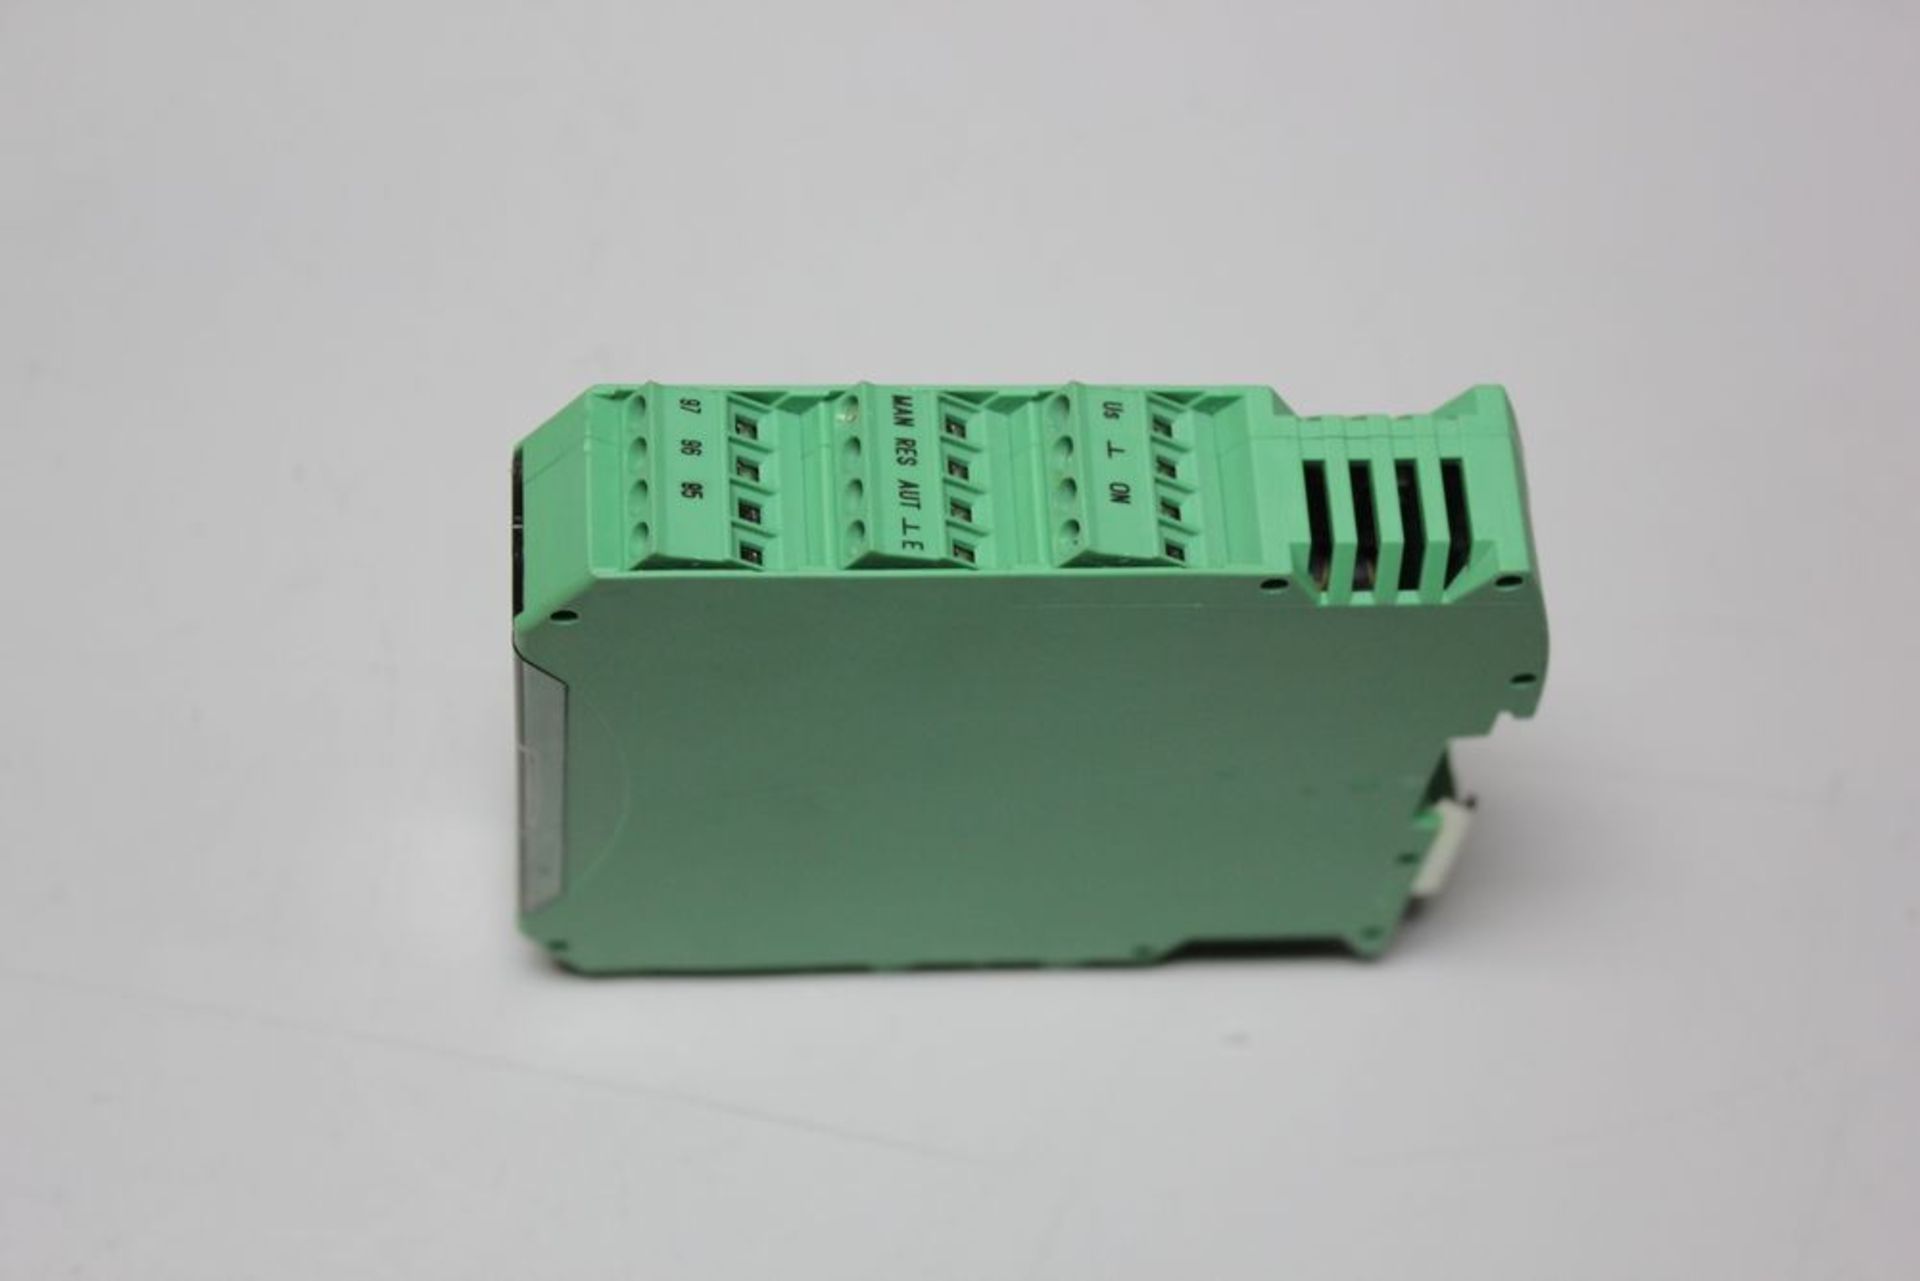 PHOENIX CONTACT SOLID STATE CONTACTOR - Image 3 of 4